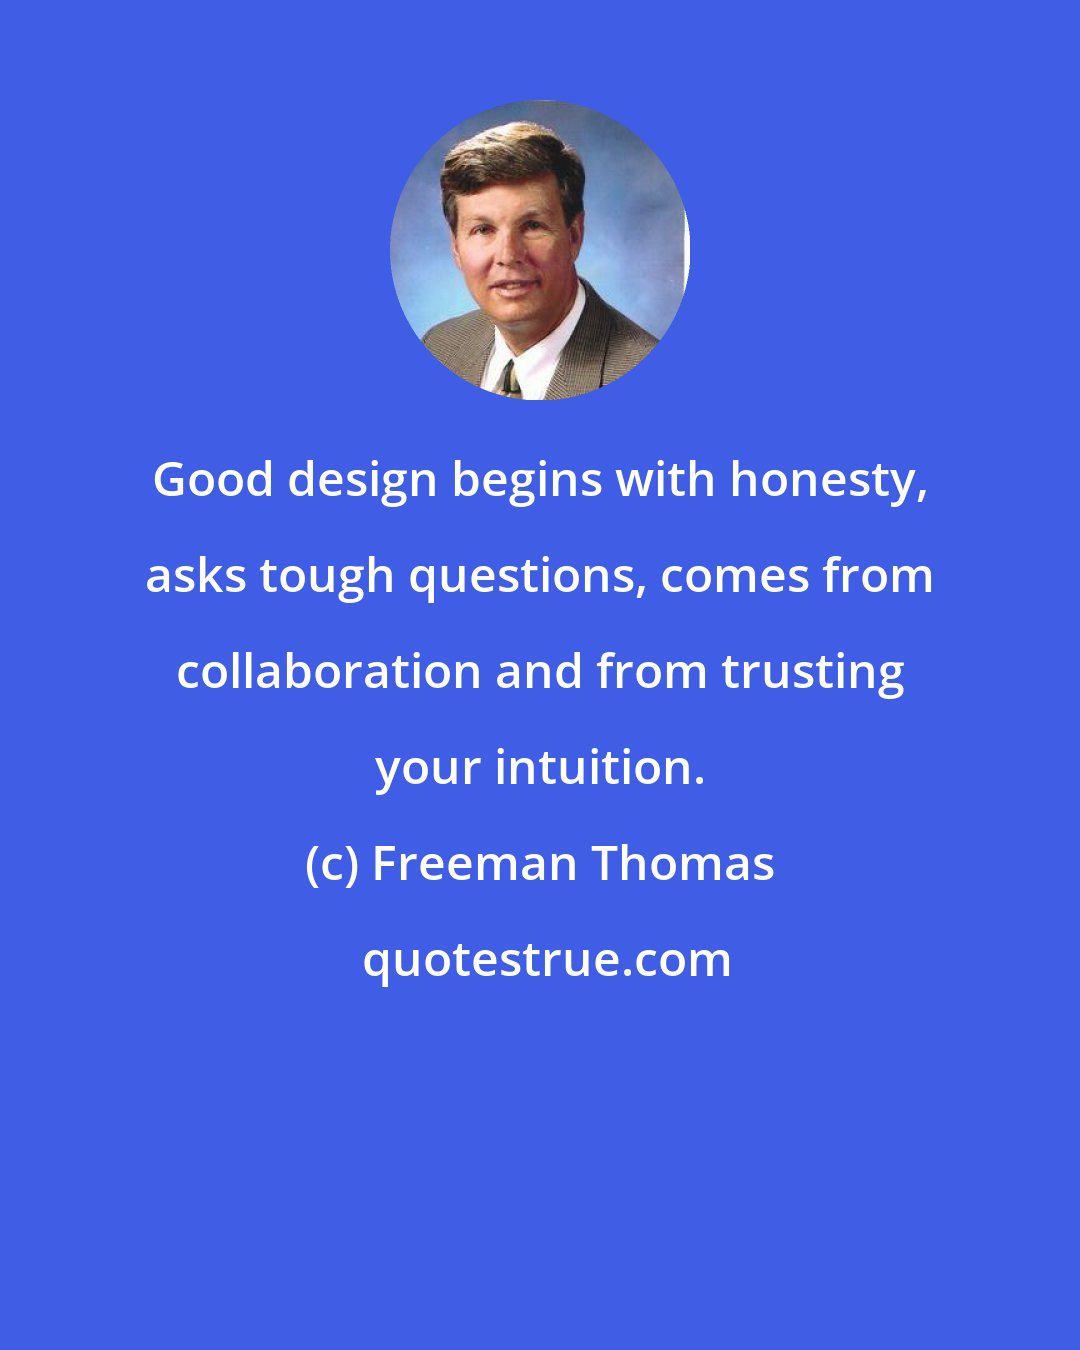 Freeman Thomas: Good design begins with honesty, asks tough questions, comes from collaboration and from trusting your intuition.